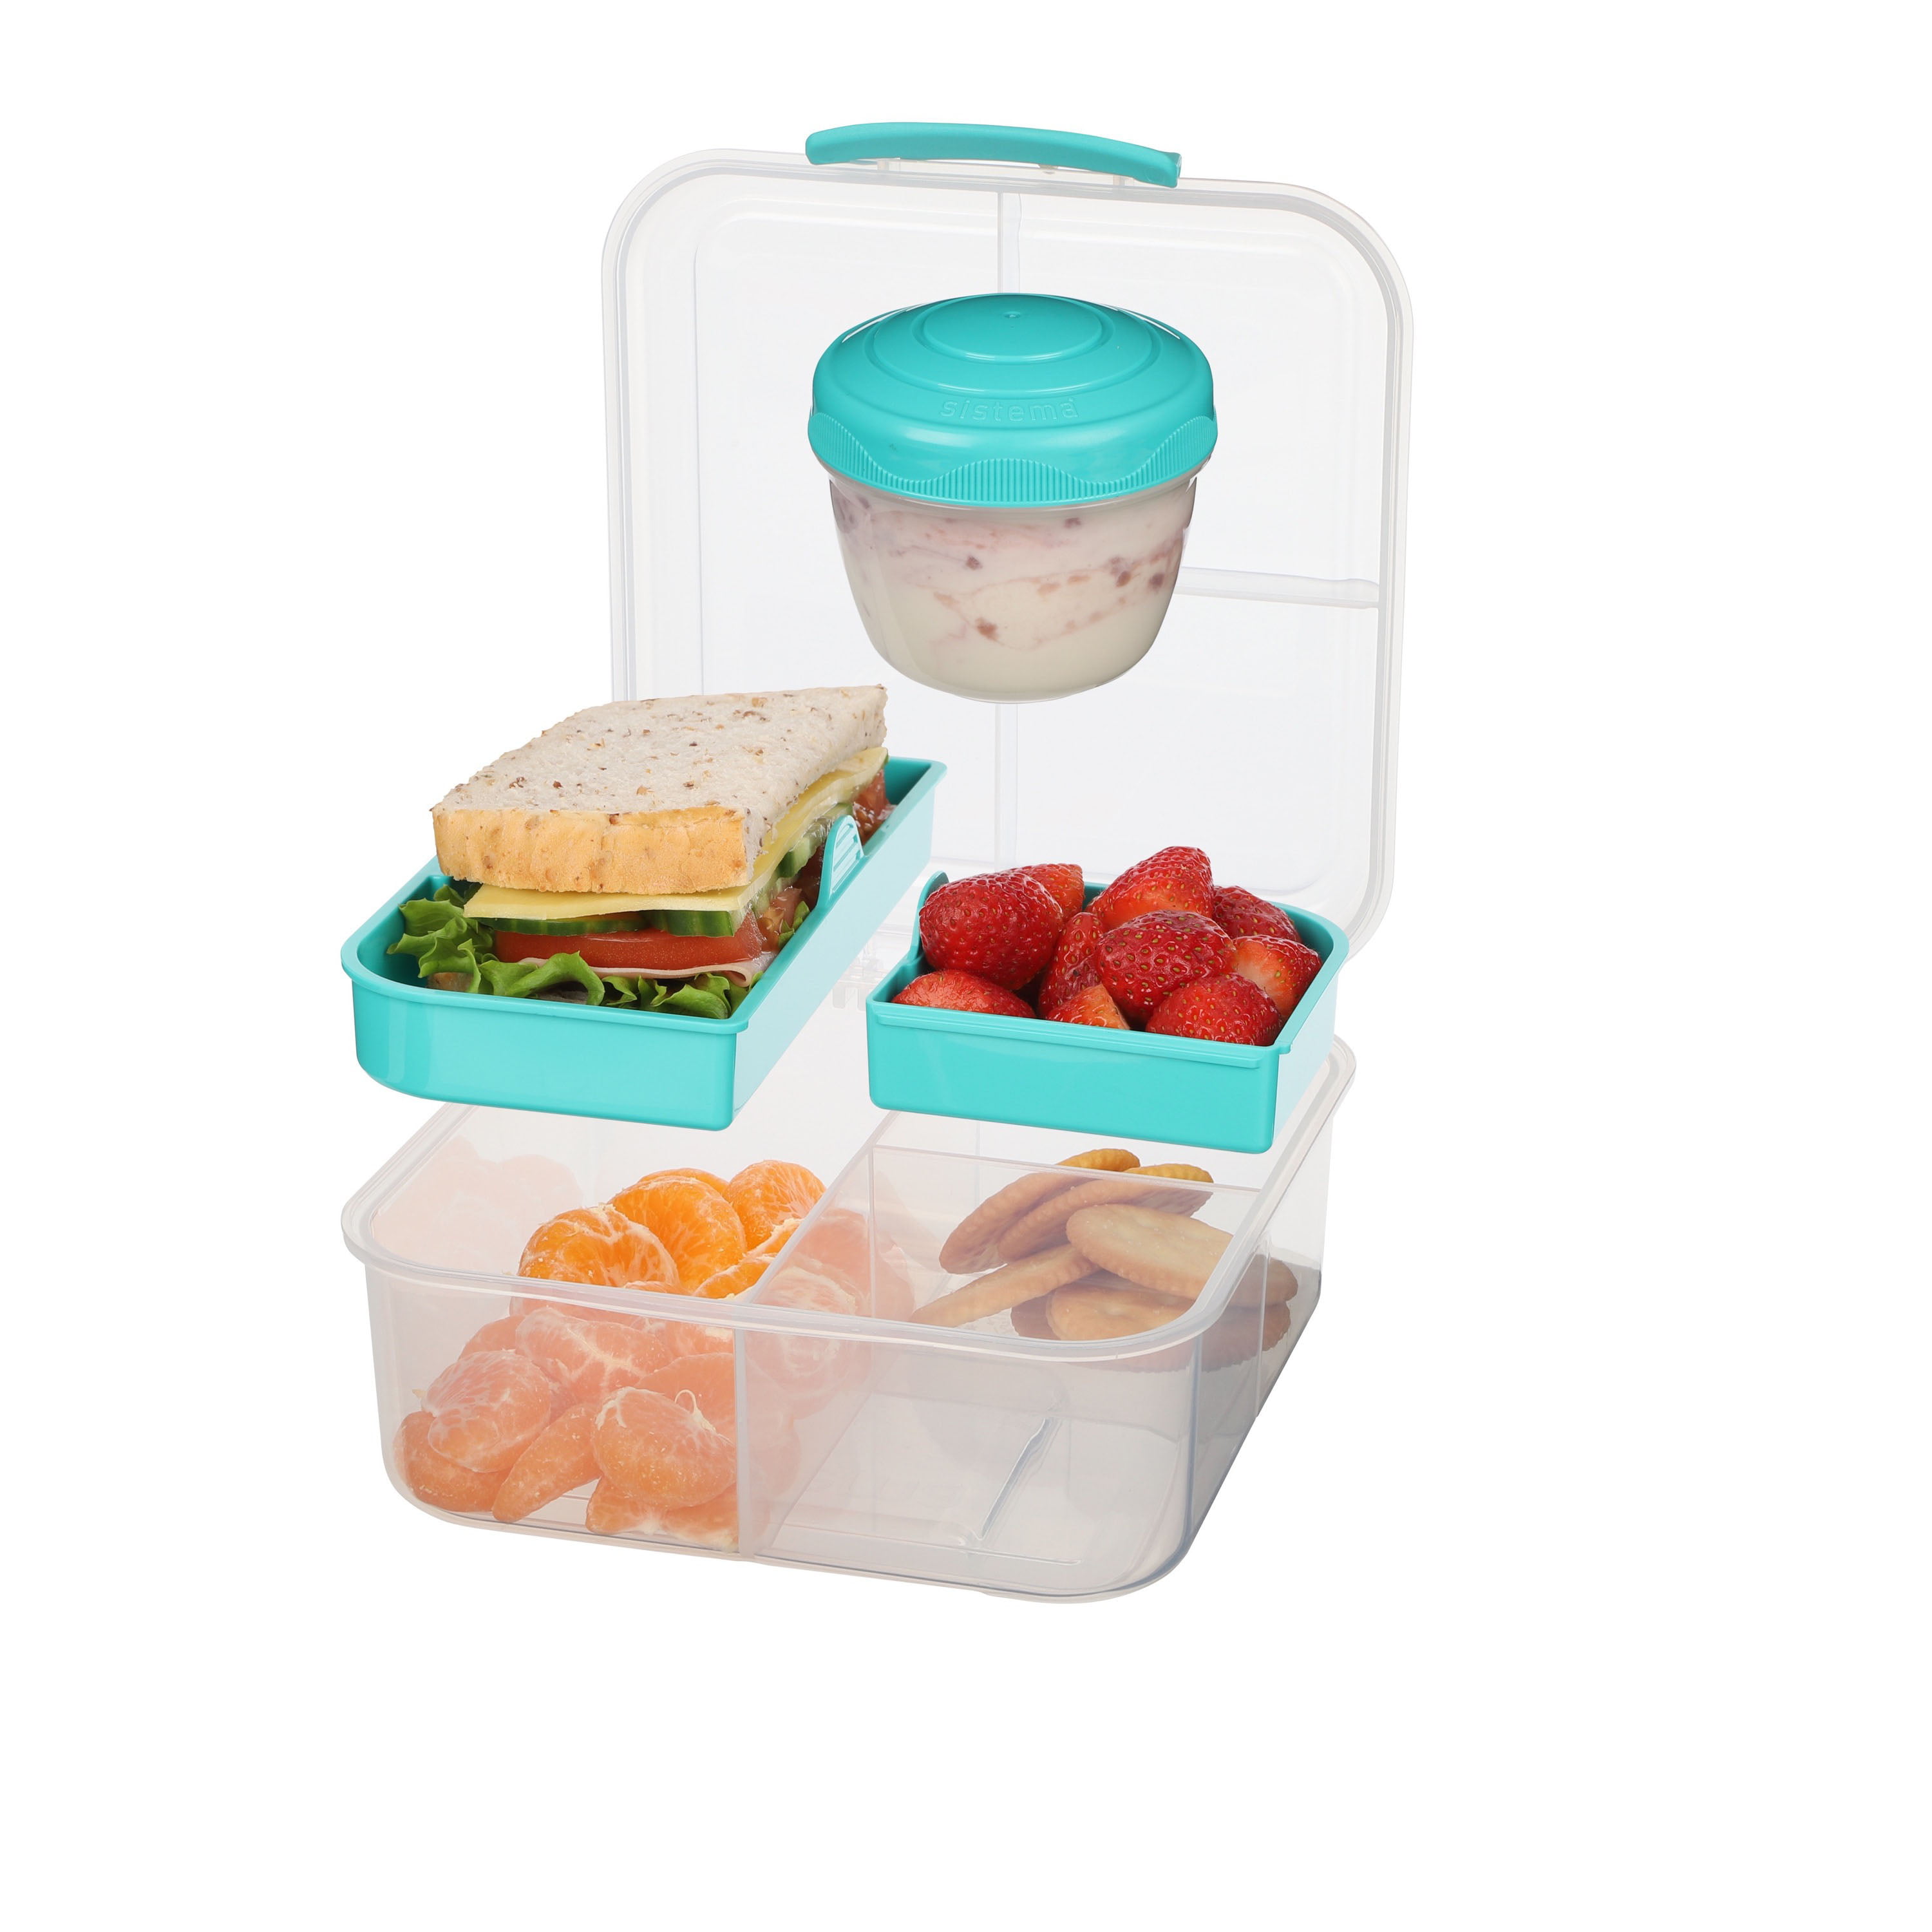 Sistema Lunch Collection Small Bento Box, 5.3 Cup (Colors May Vary)